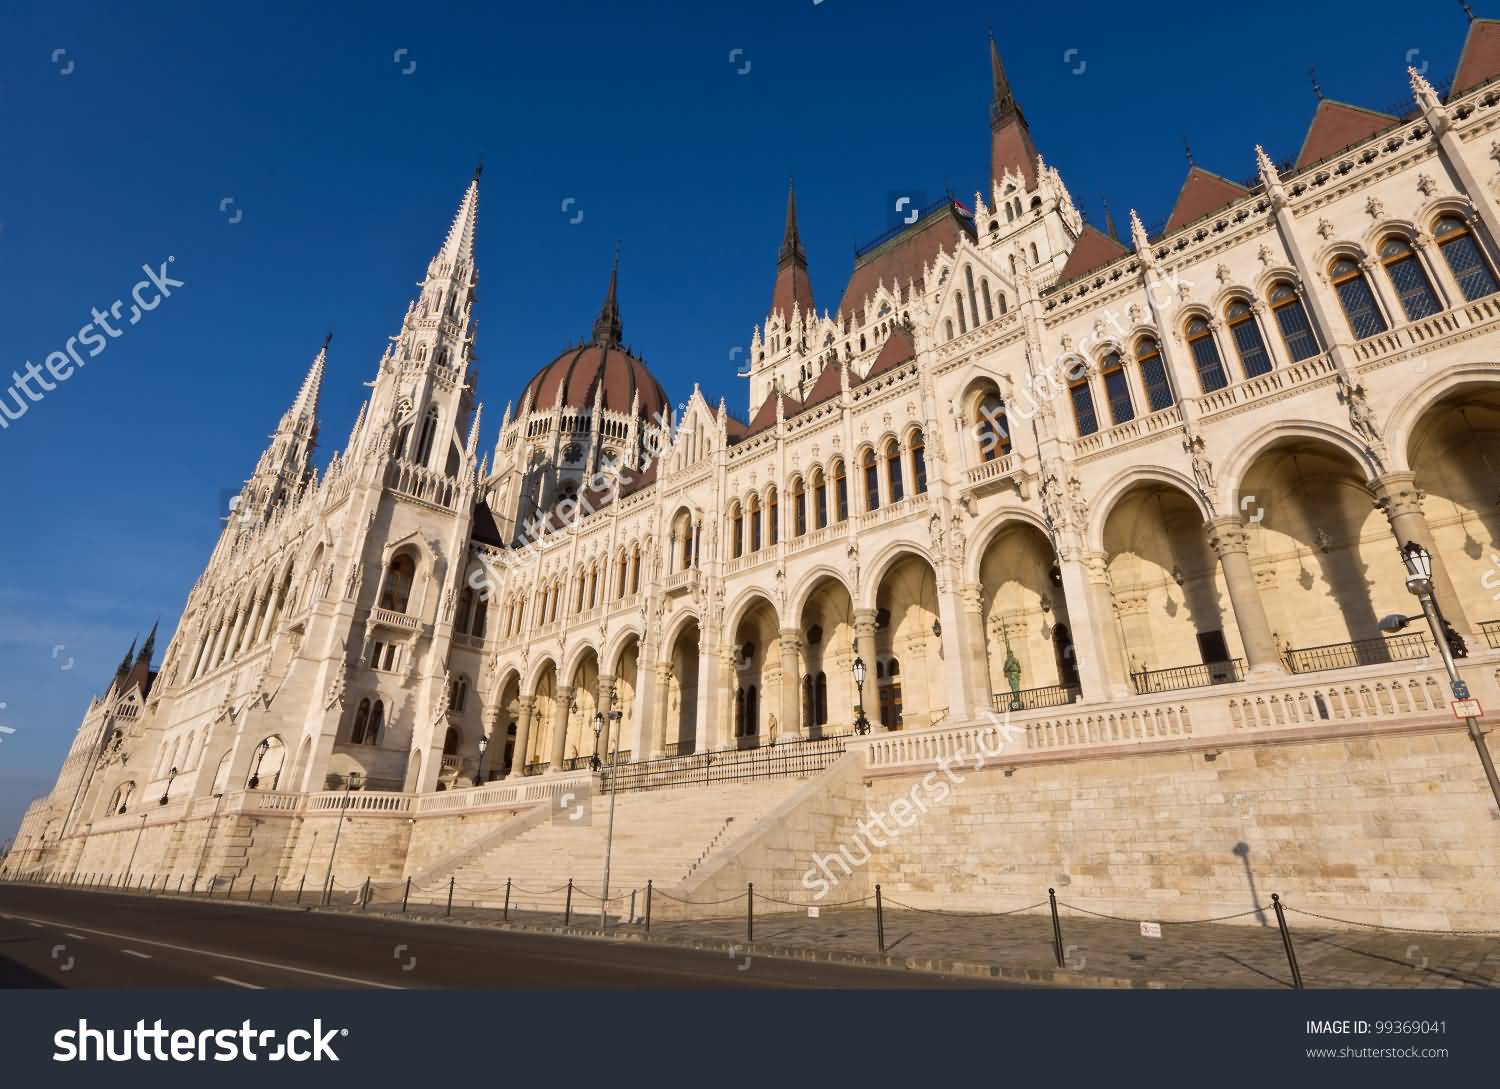 Side View Of The Hungarian Parliament Building In Budapest